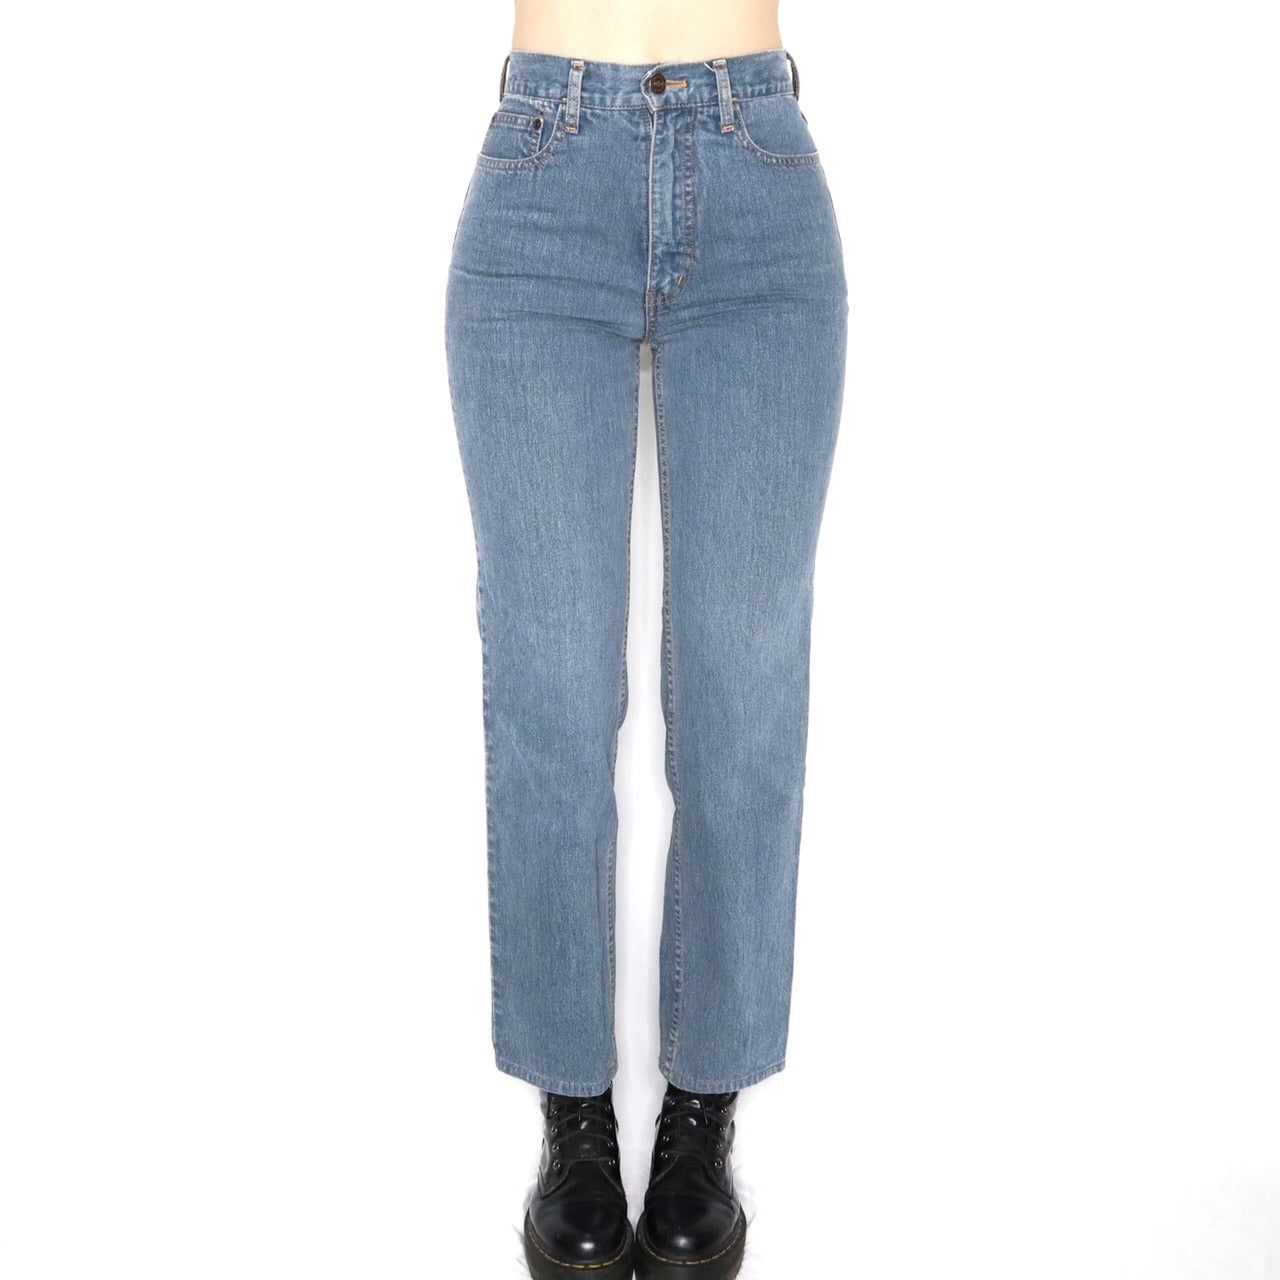 Vintage 80s High Waisted Jeans